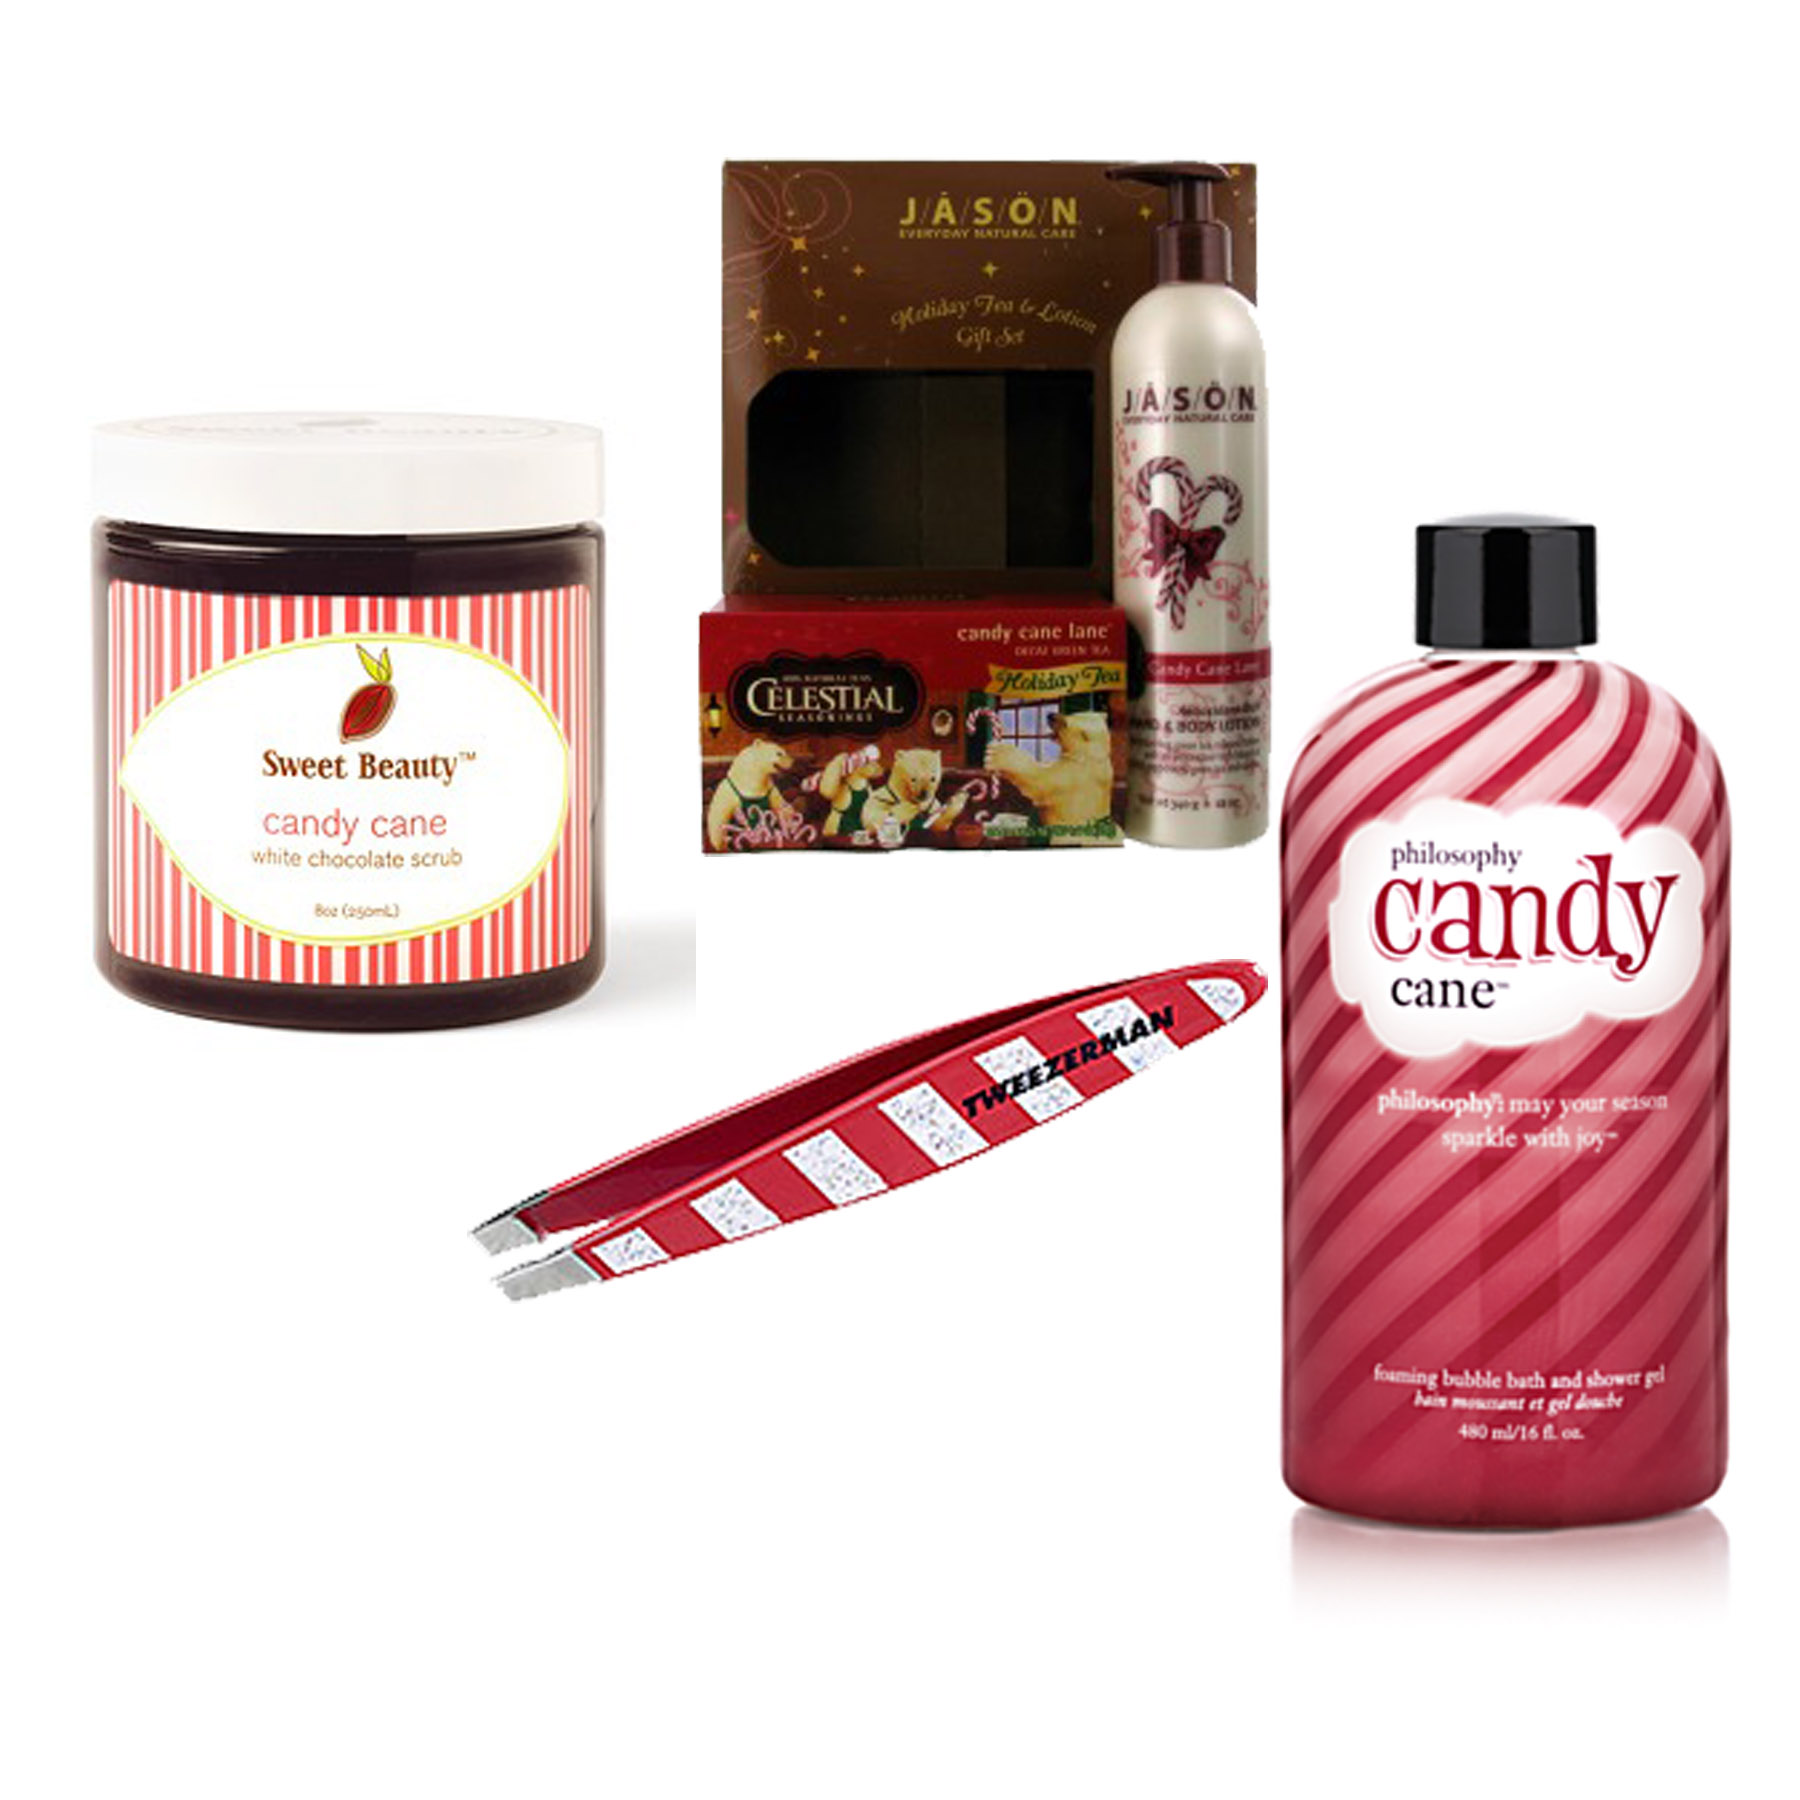 Candy cane beauty products